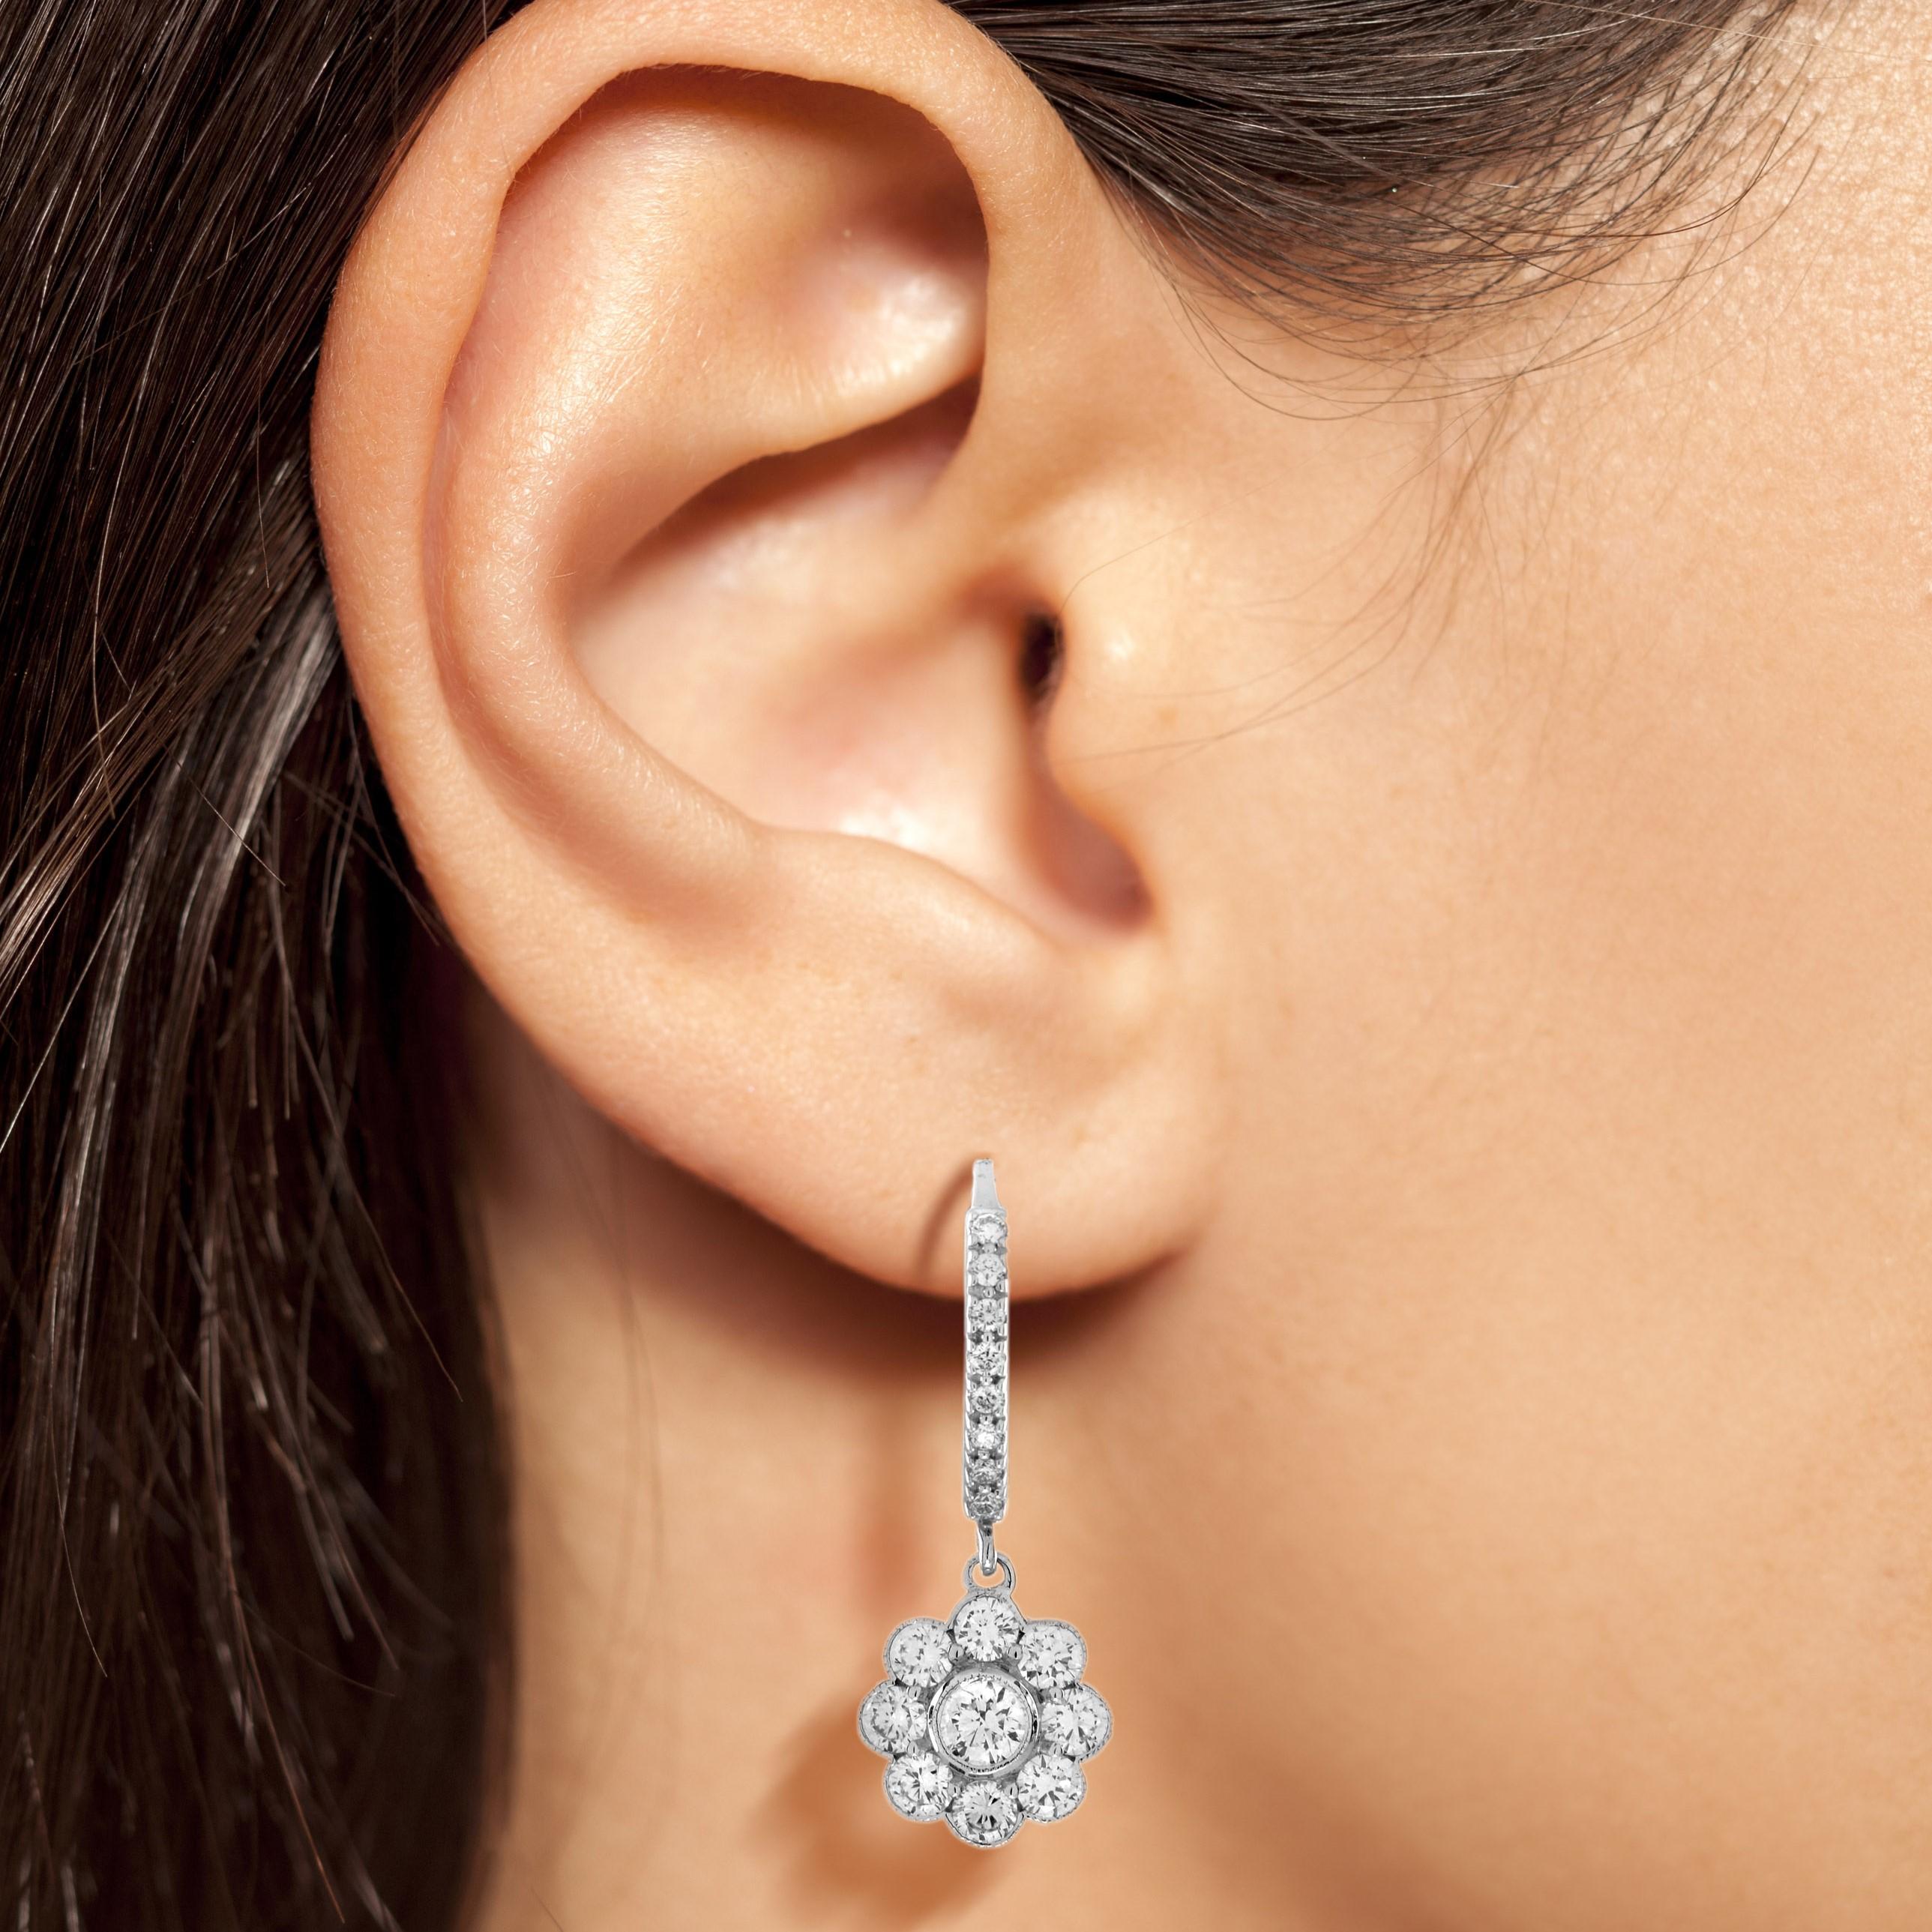 Round diamonds create the eight petals in this intriguing vintage inspired flower earrings. A  3.5 mm. round diamond is set in the center for the flower design. This is an Edwardian style daisy flower earrings that has remained popular since early